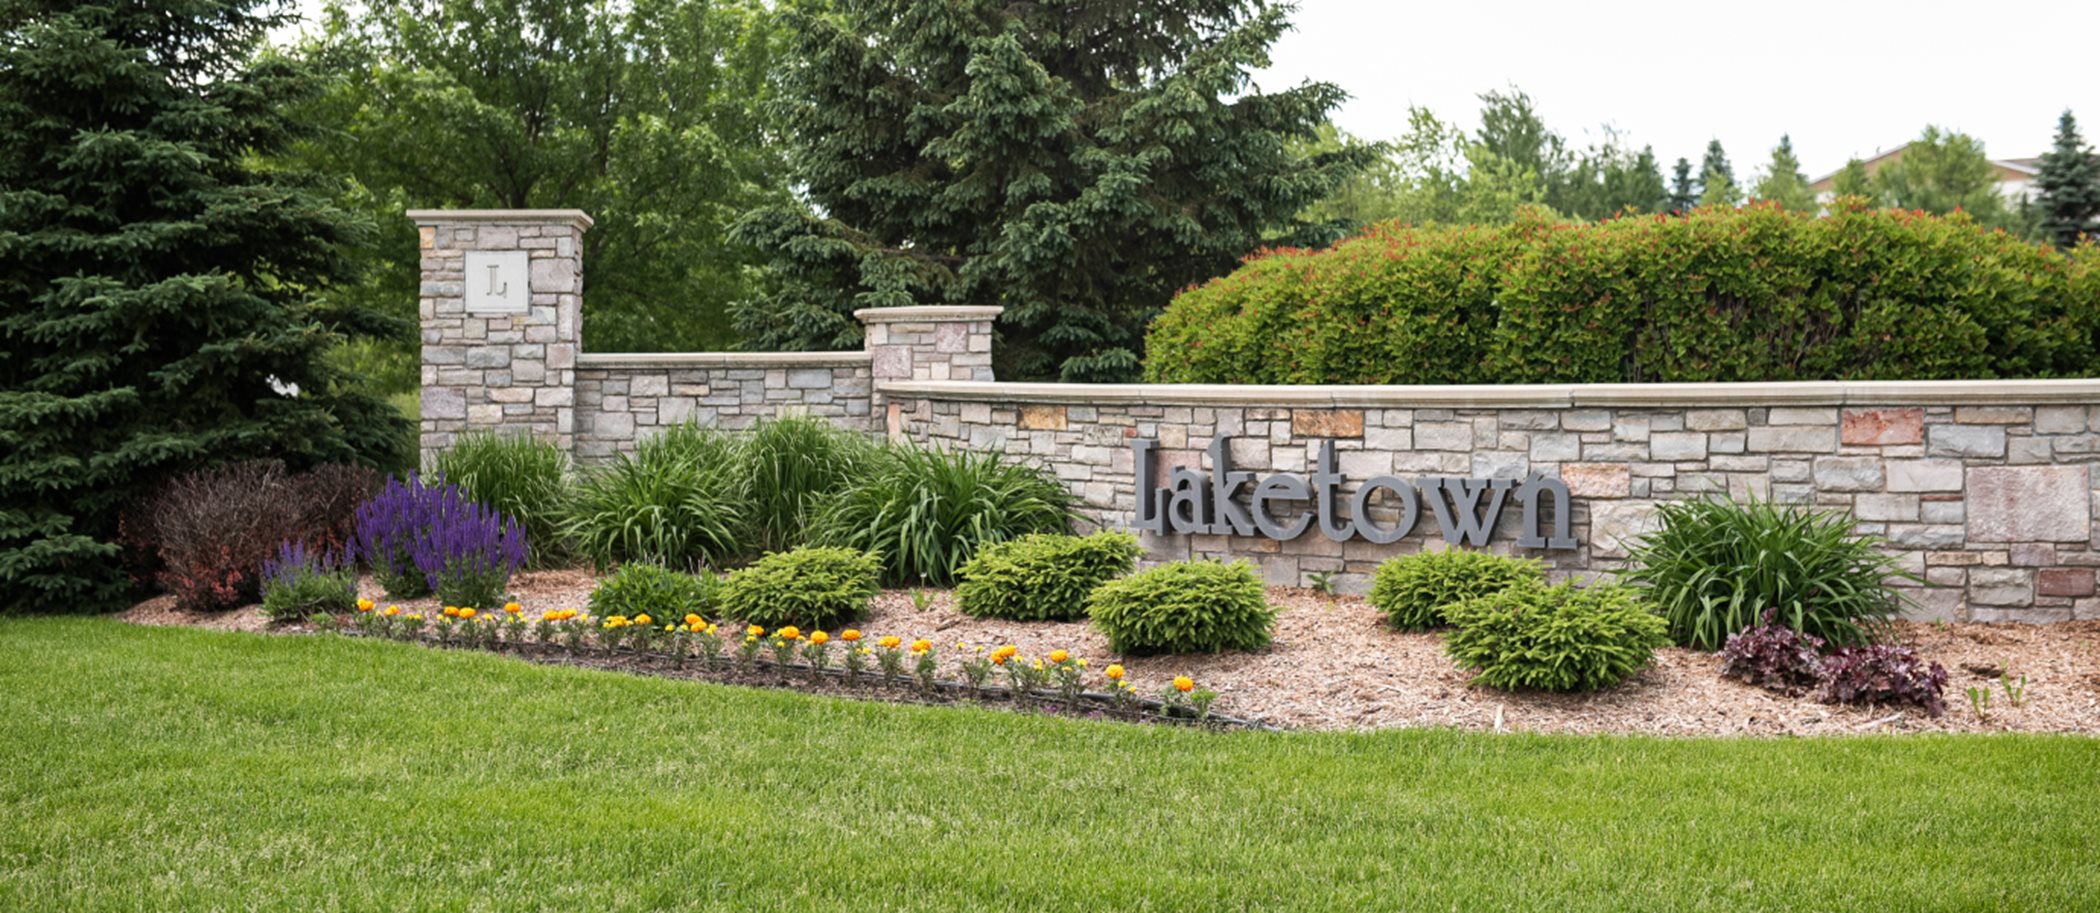 Laketown Colonial Patriot Collection Entrance